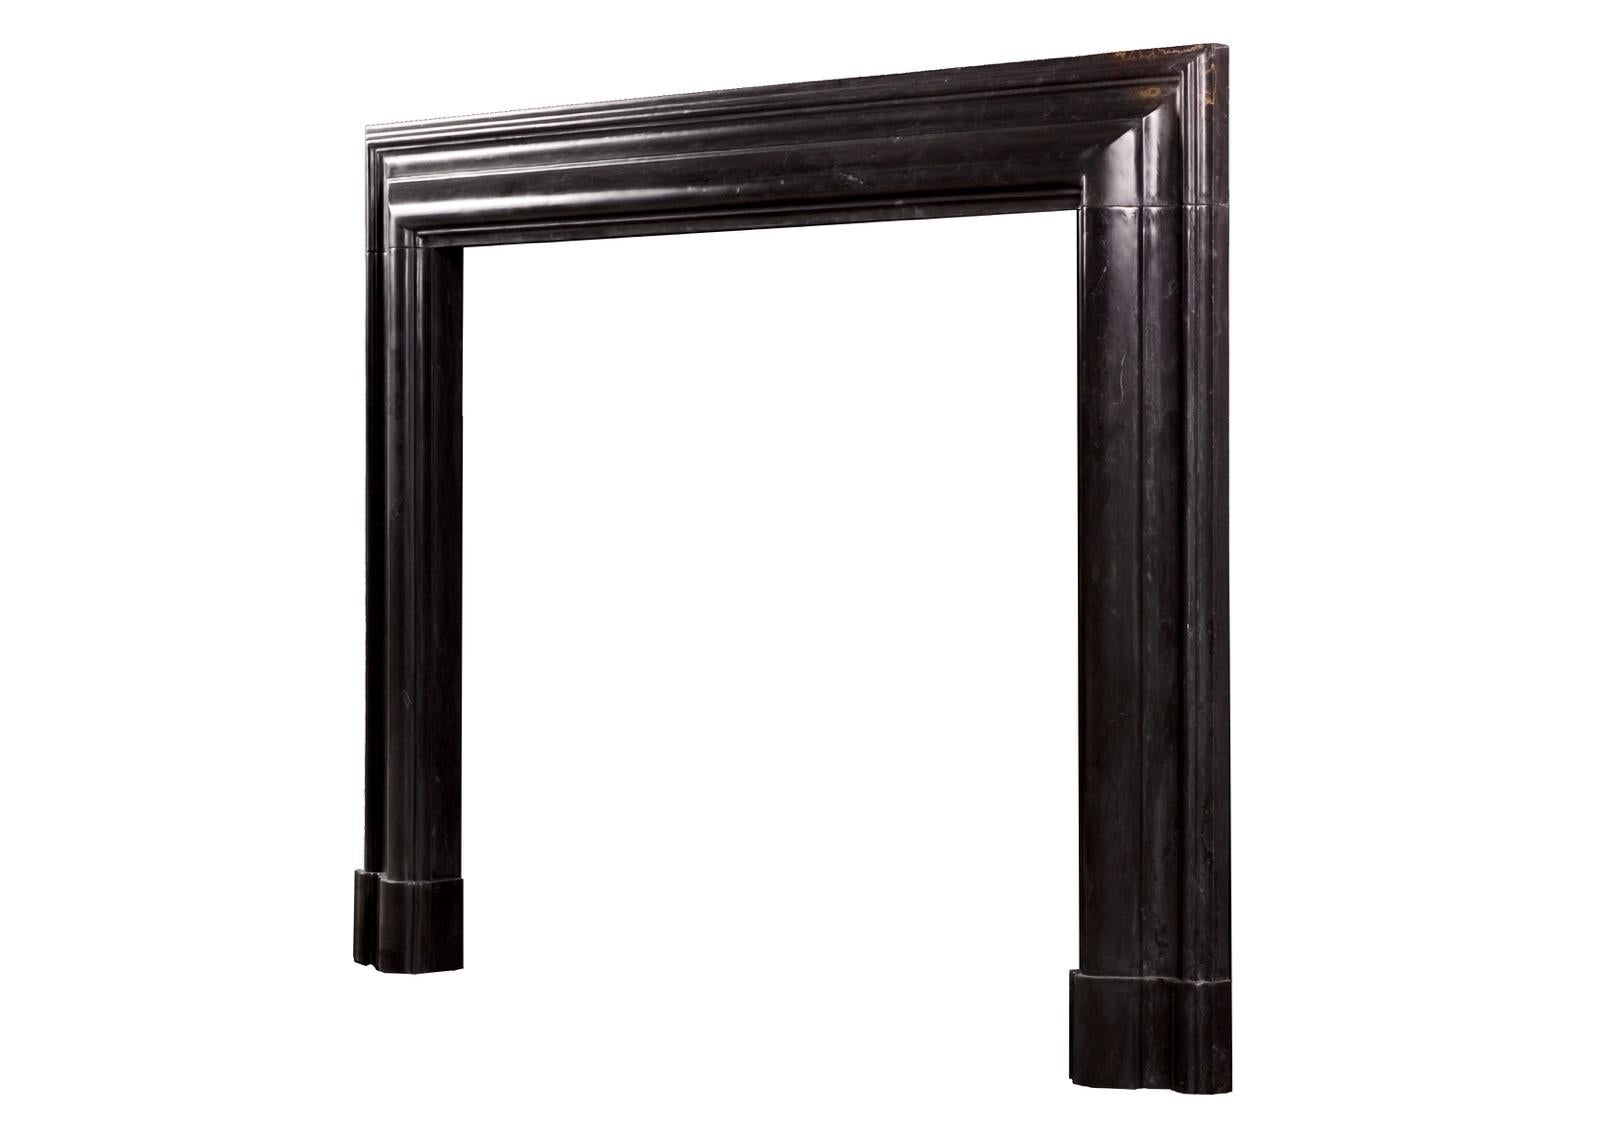 English Bolection Fireplace in Black Marble For Sale